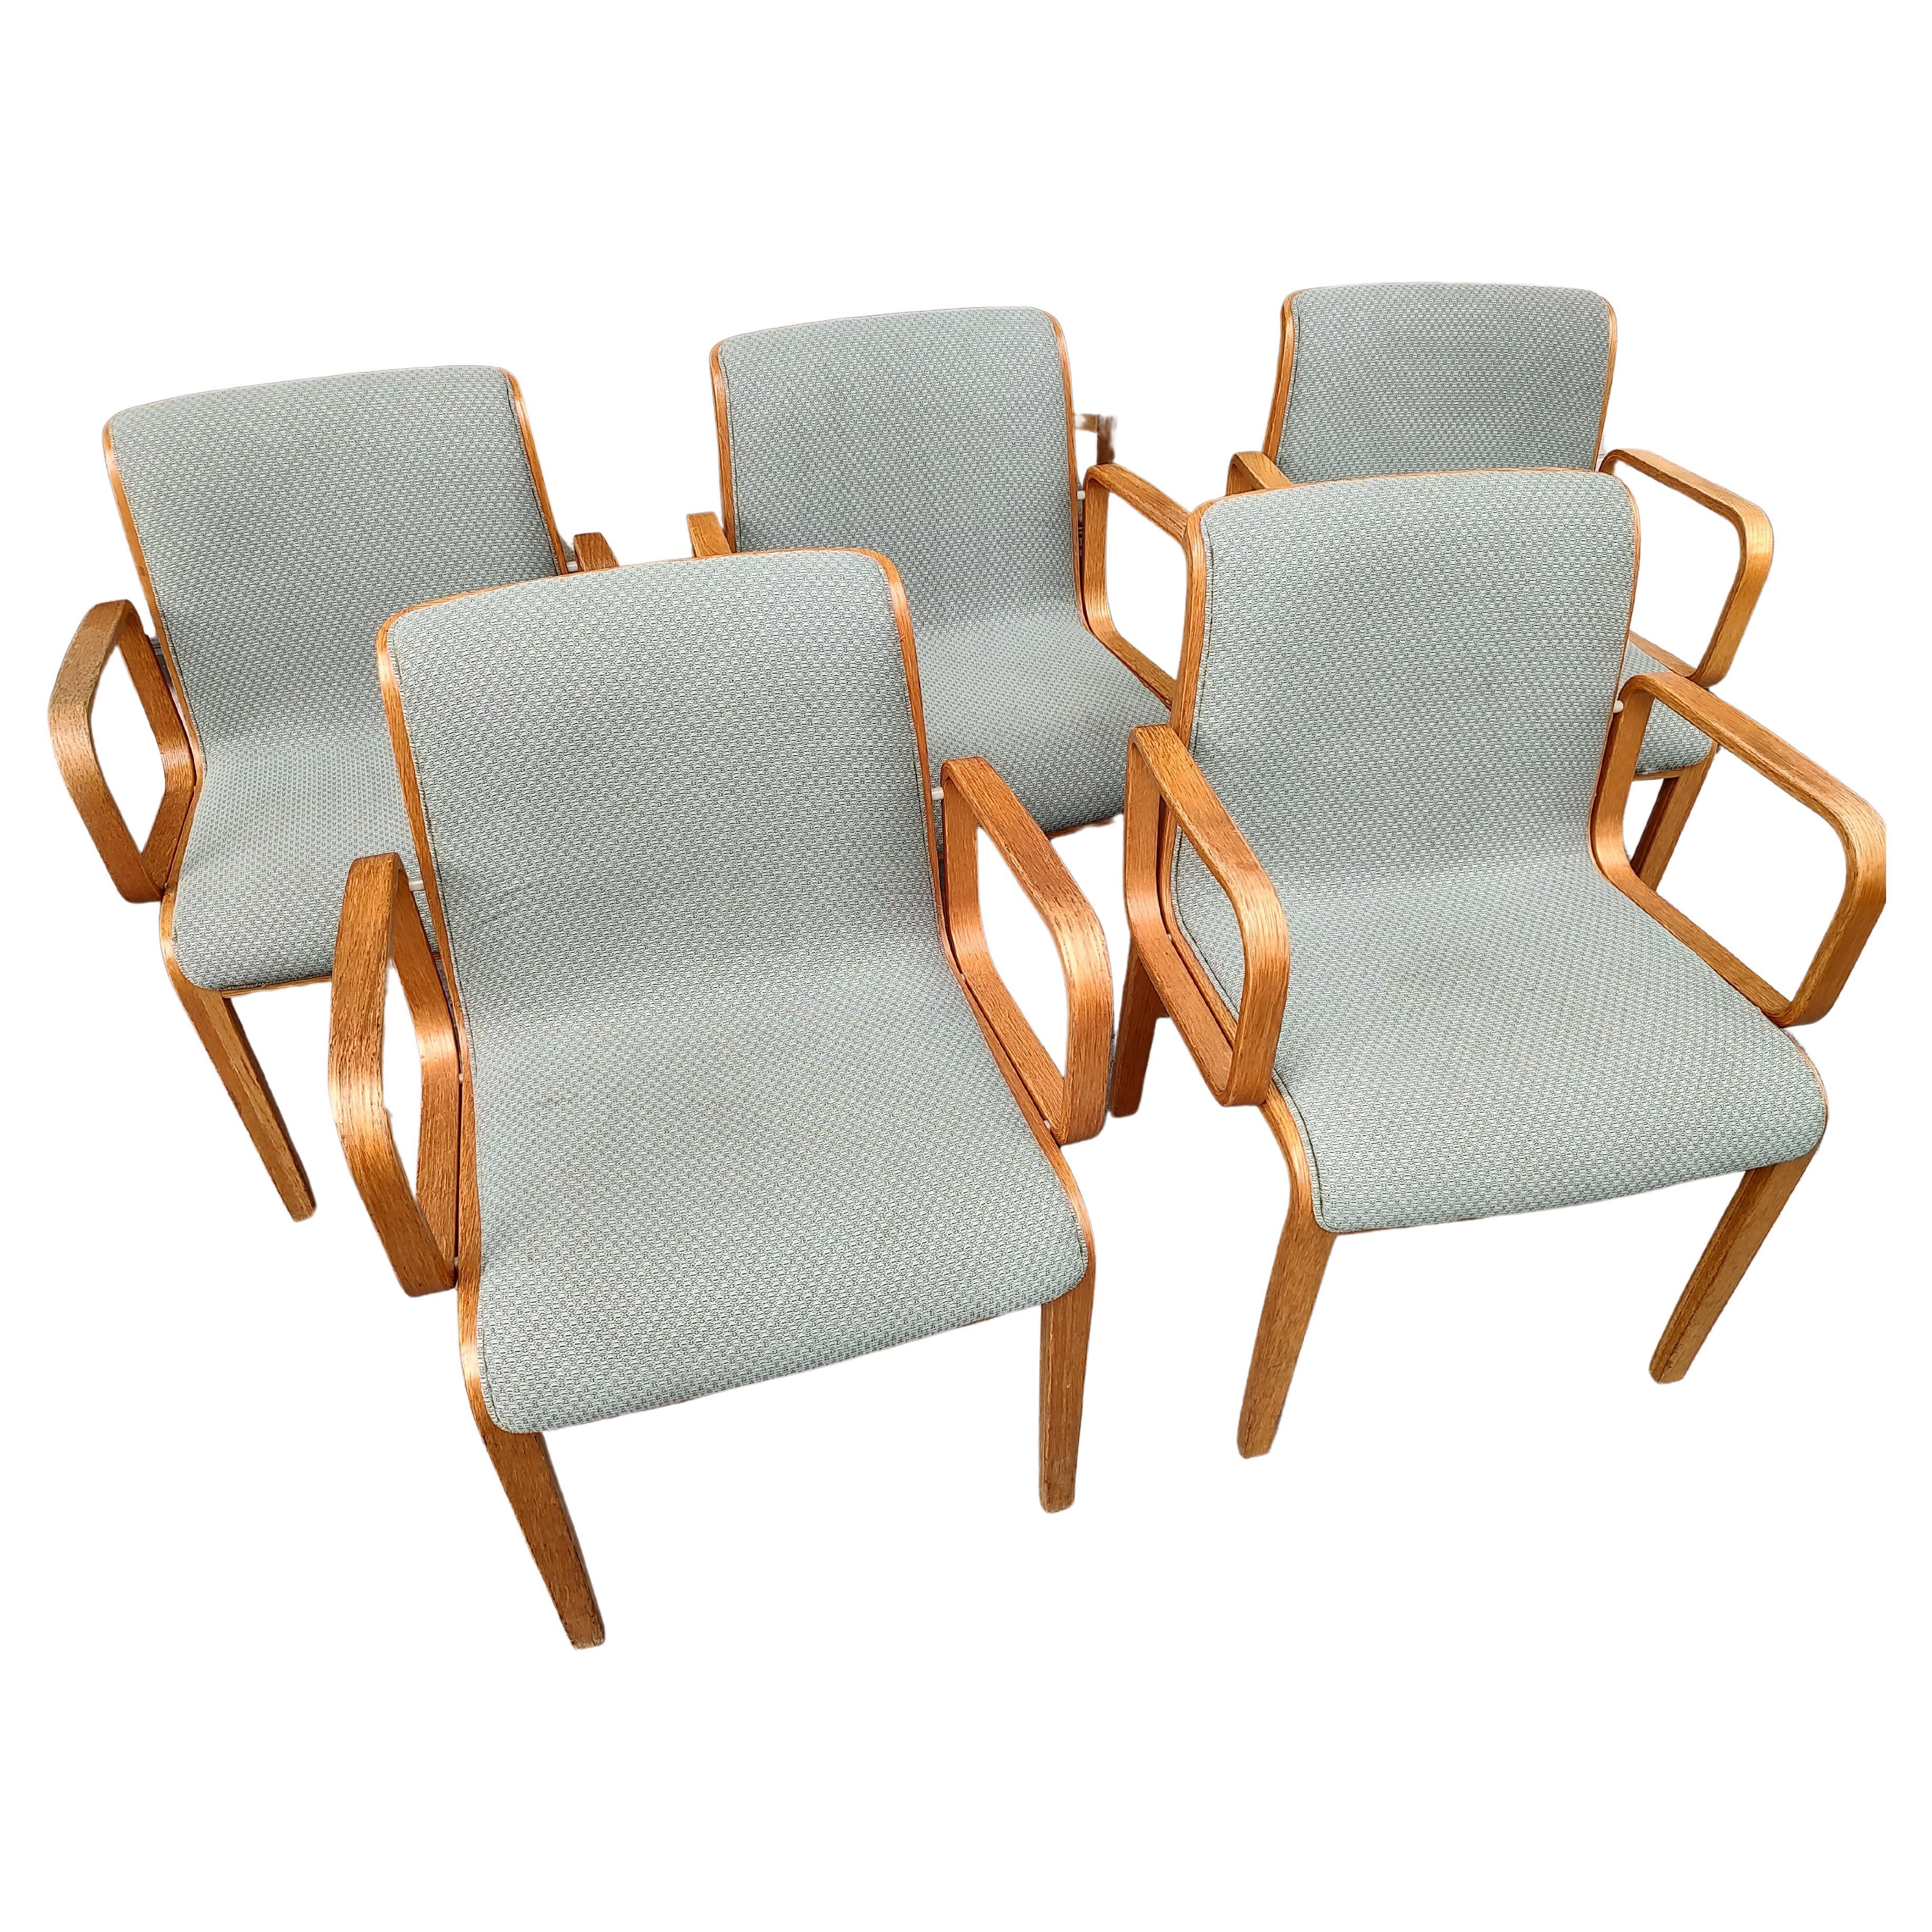 Mid-Century Modern Oak Armchairs Bill Stephens for Knoll International 5 Avail. For Sale